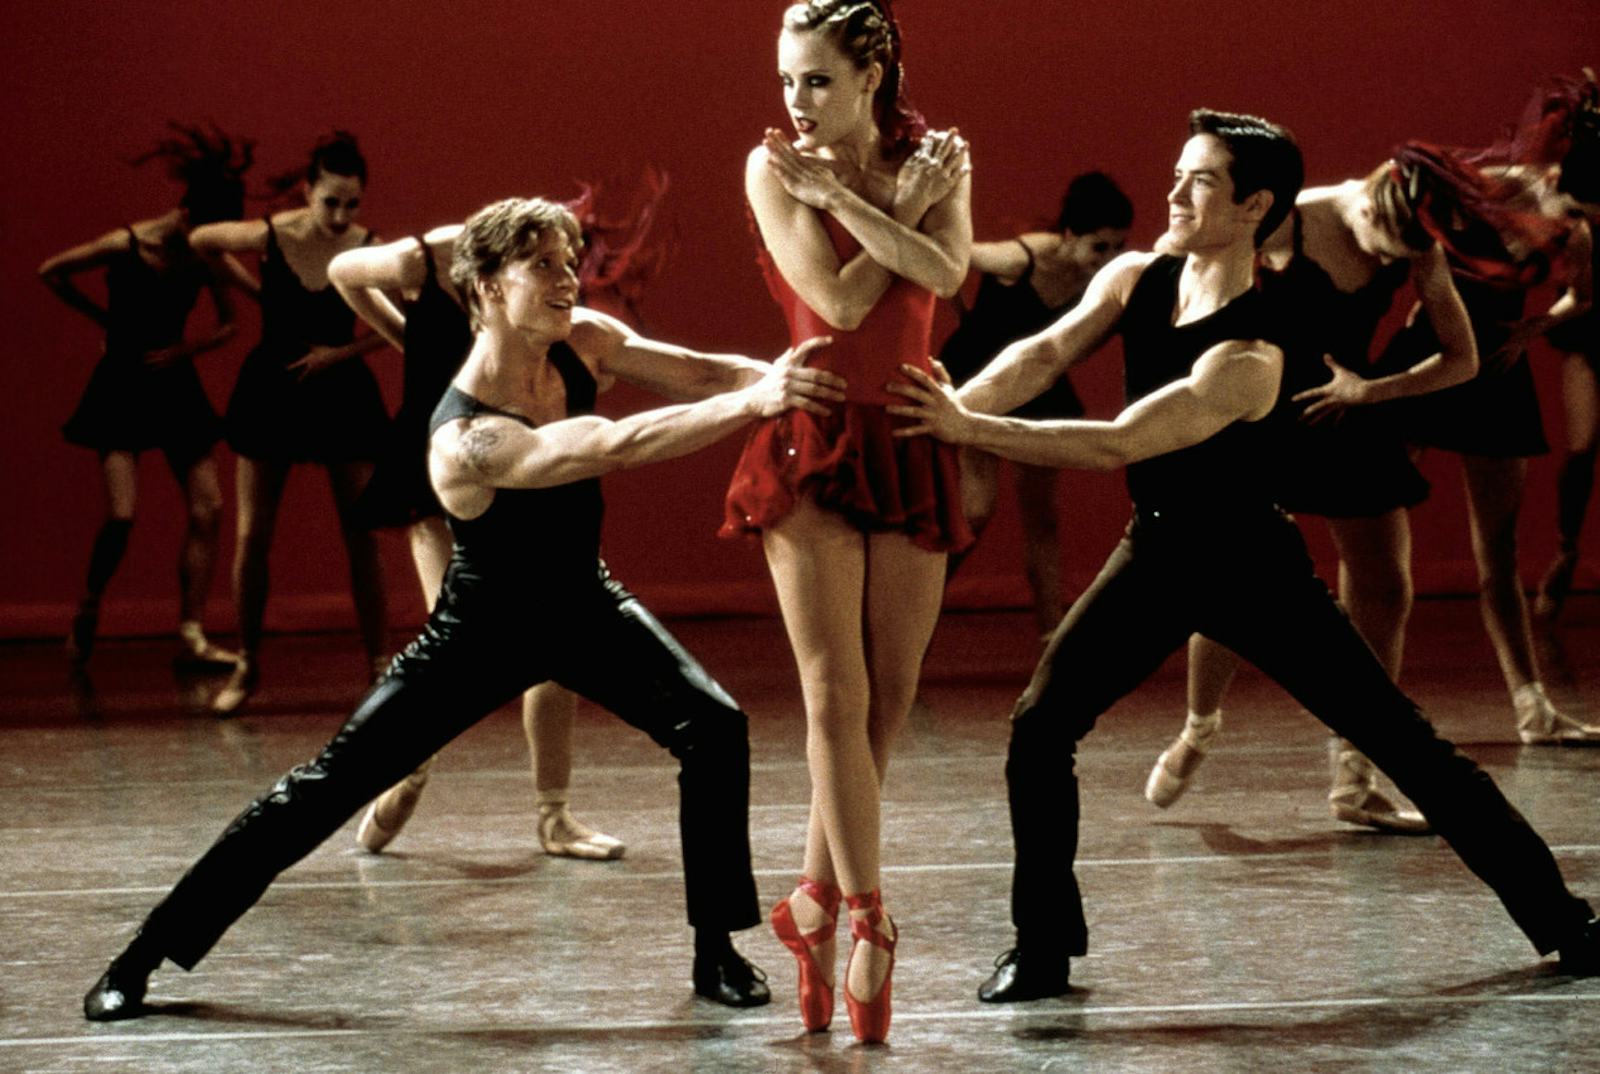 Ranking The 22 Best Dance Movies Over The Years, From 'Center Stage' To